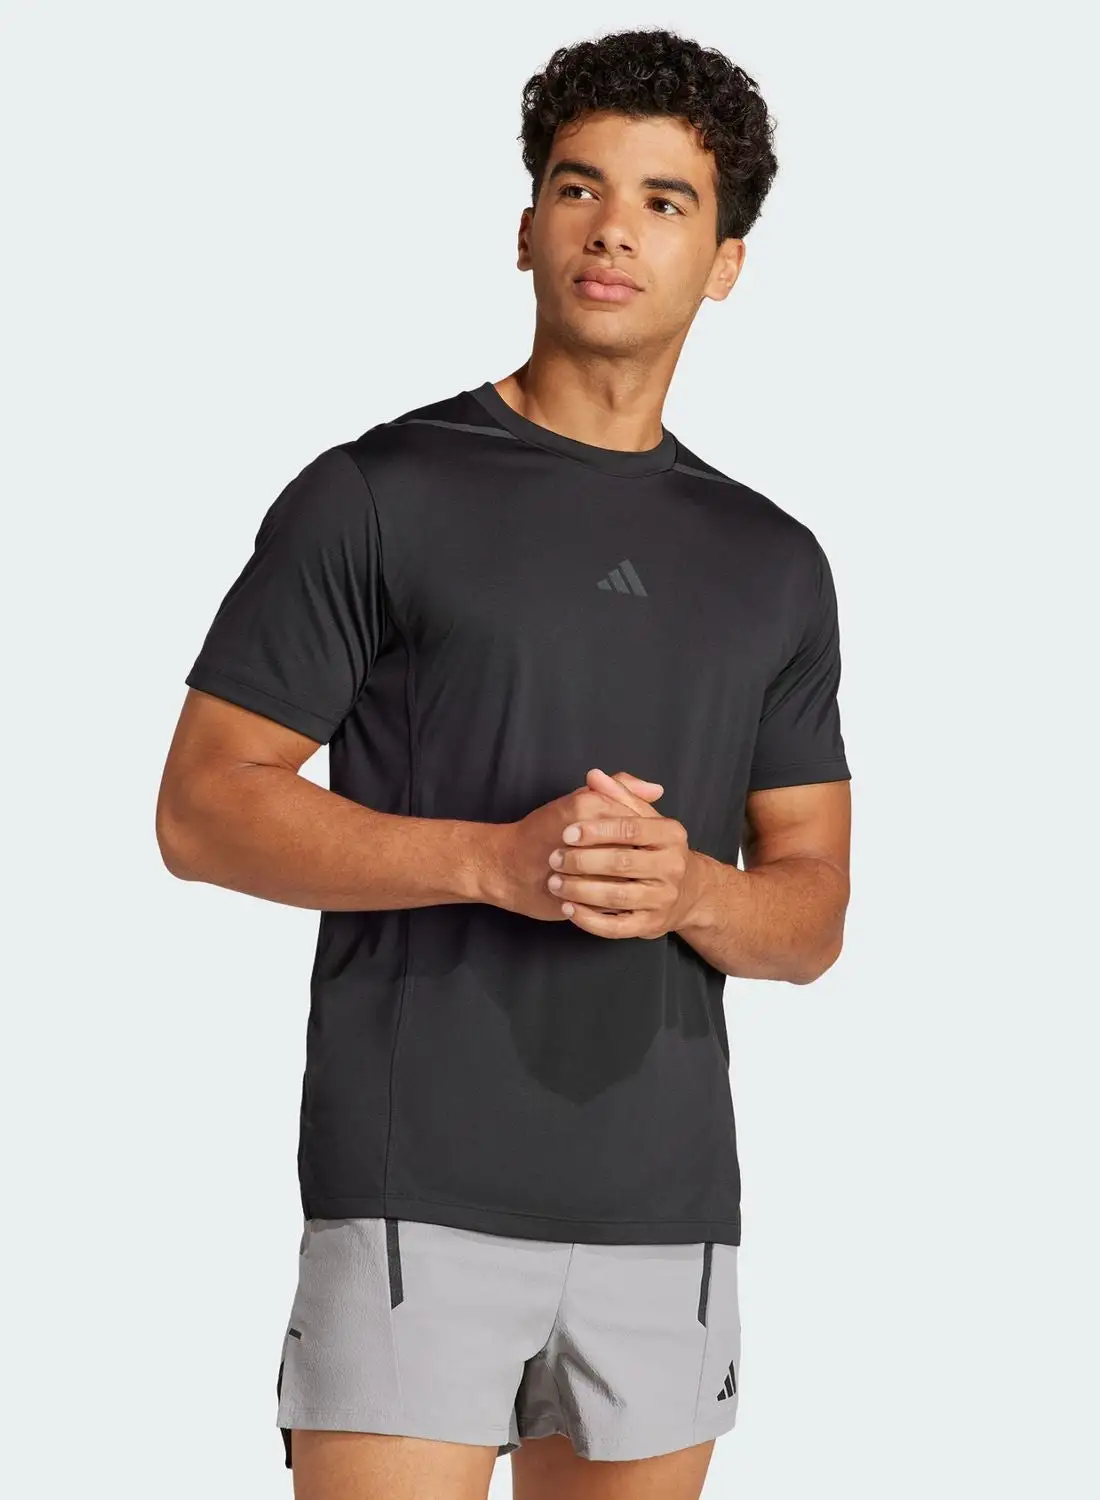 Adidas Designed For Training Adistrong Workout T-Shirt